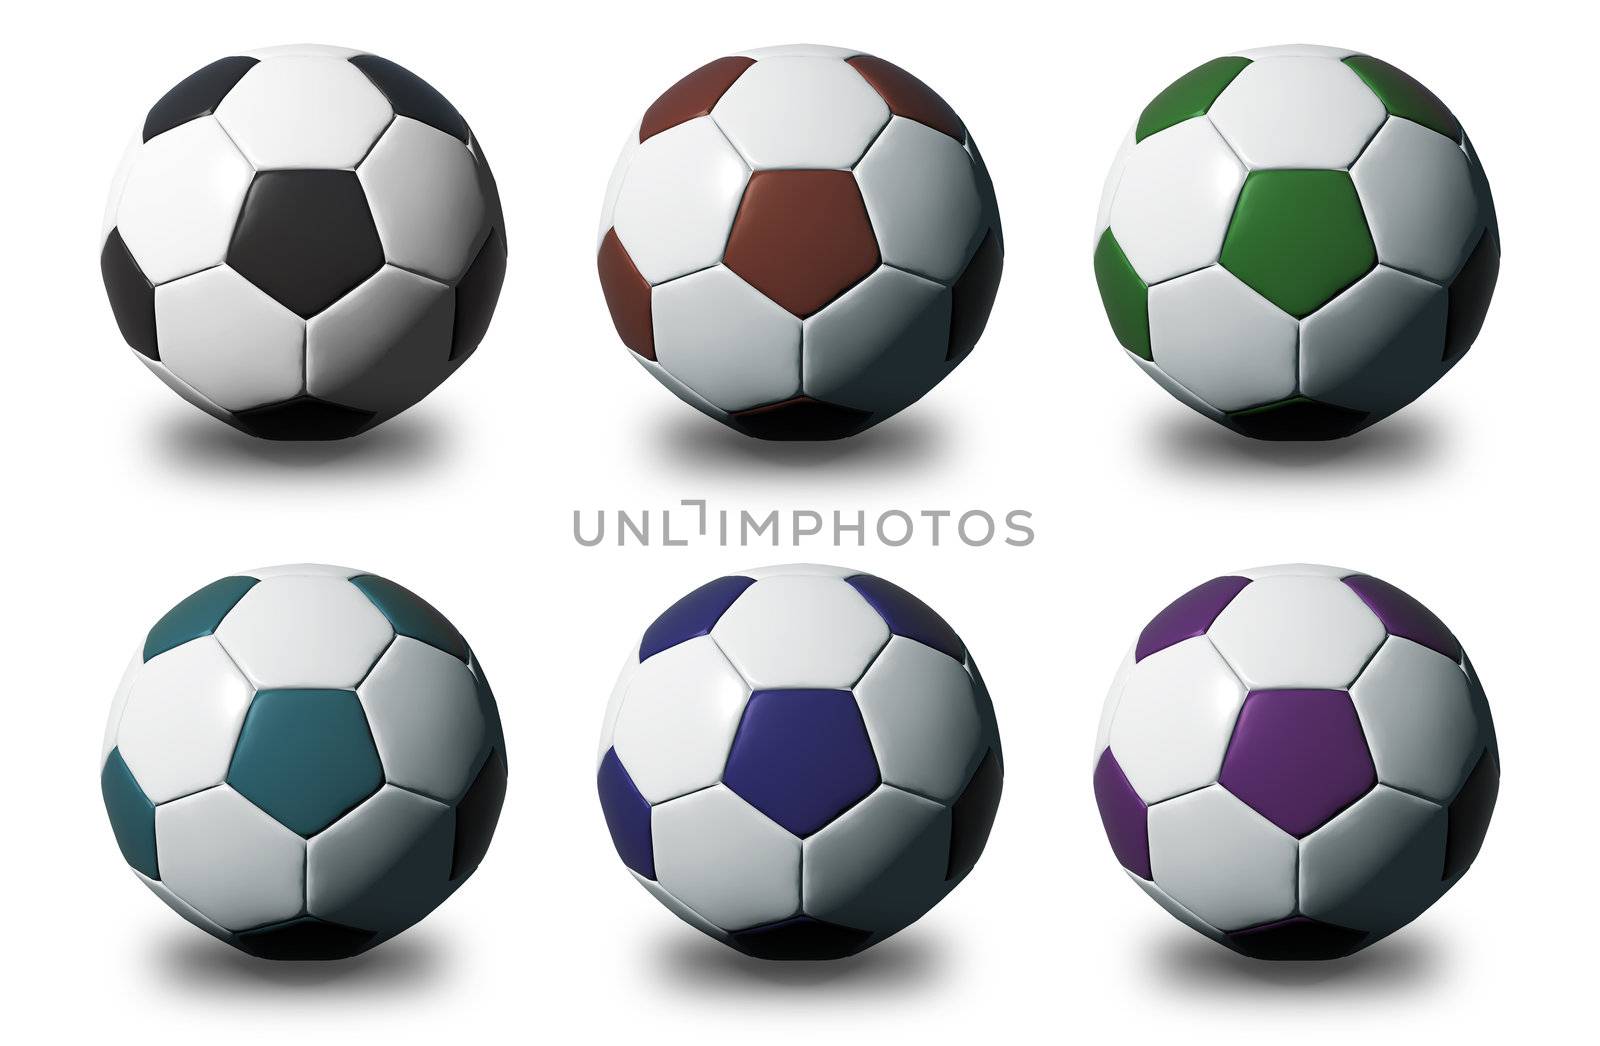 High resolution Colorful 3D soccer balls isolated on white background 